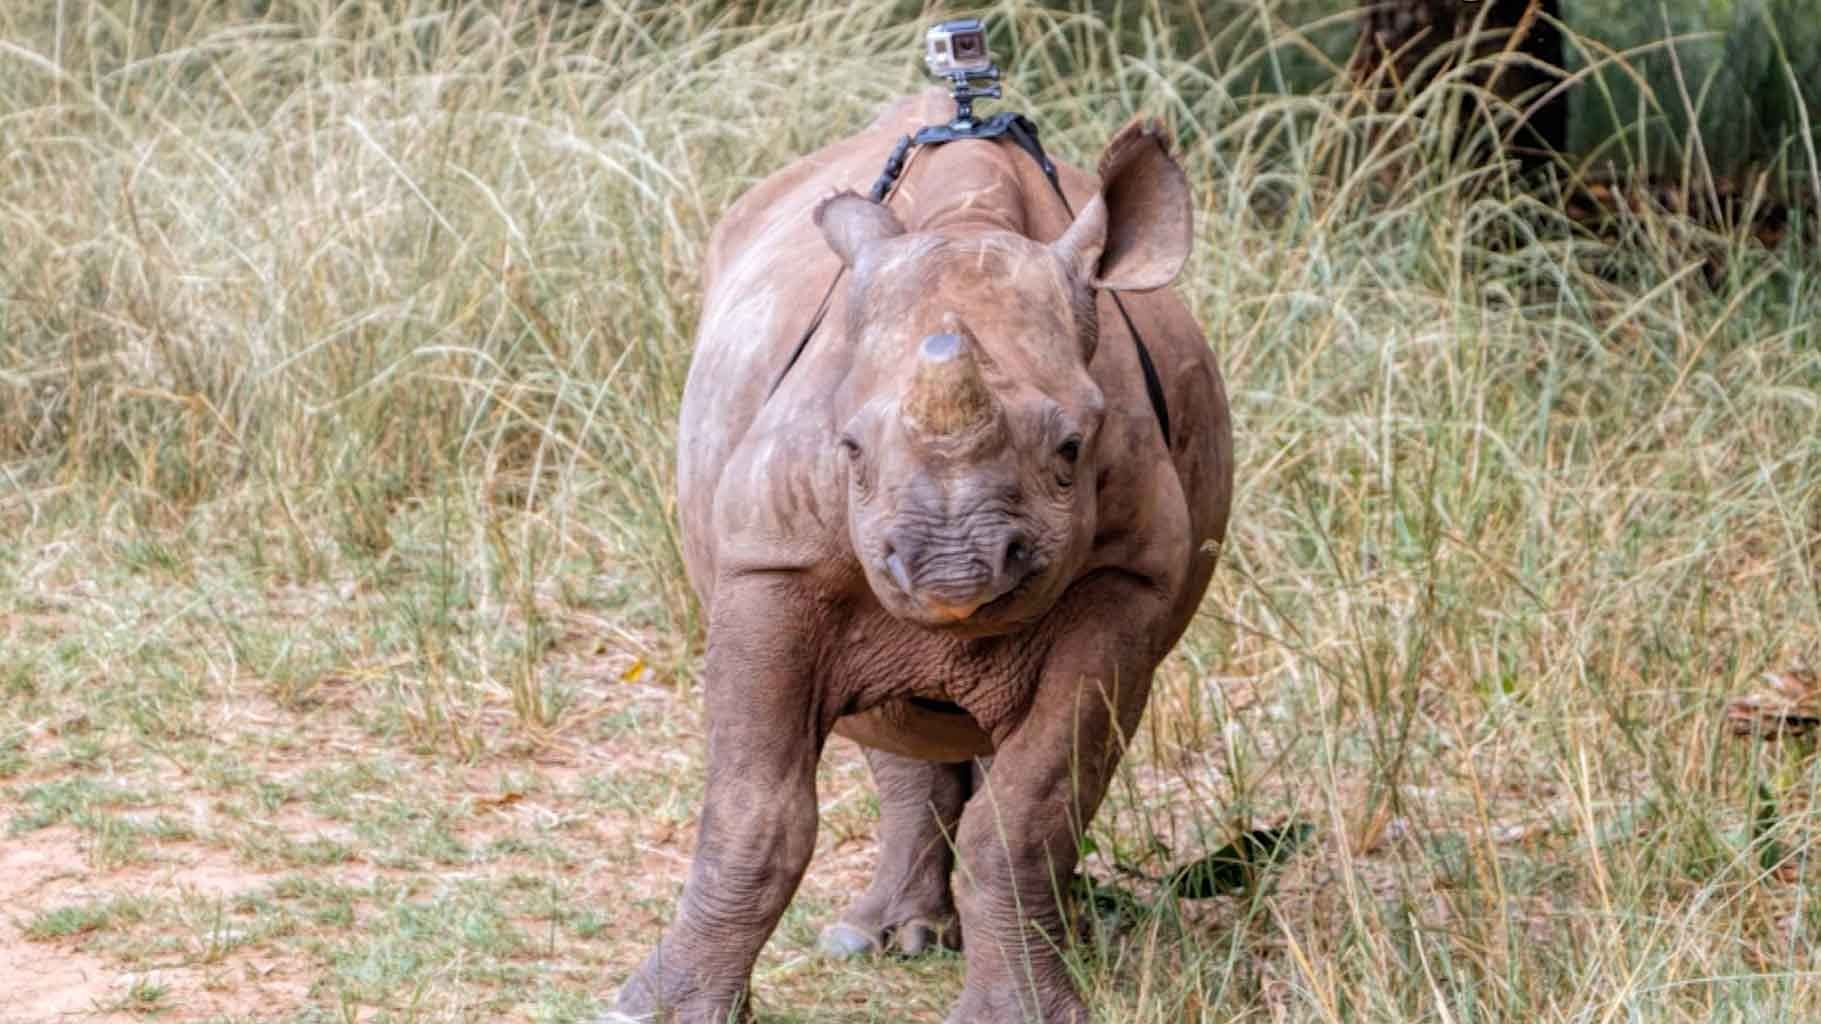 Thor, the two-year-old Rhino with a GoPro camera. (Photo: AP)